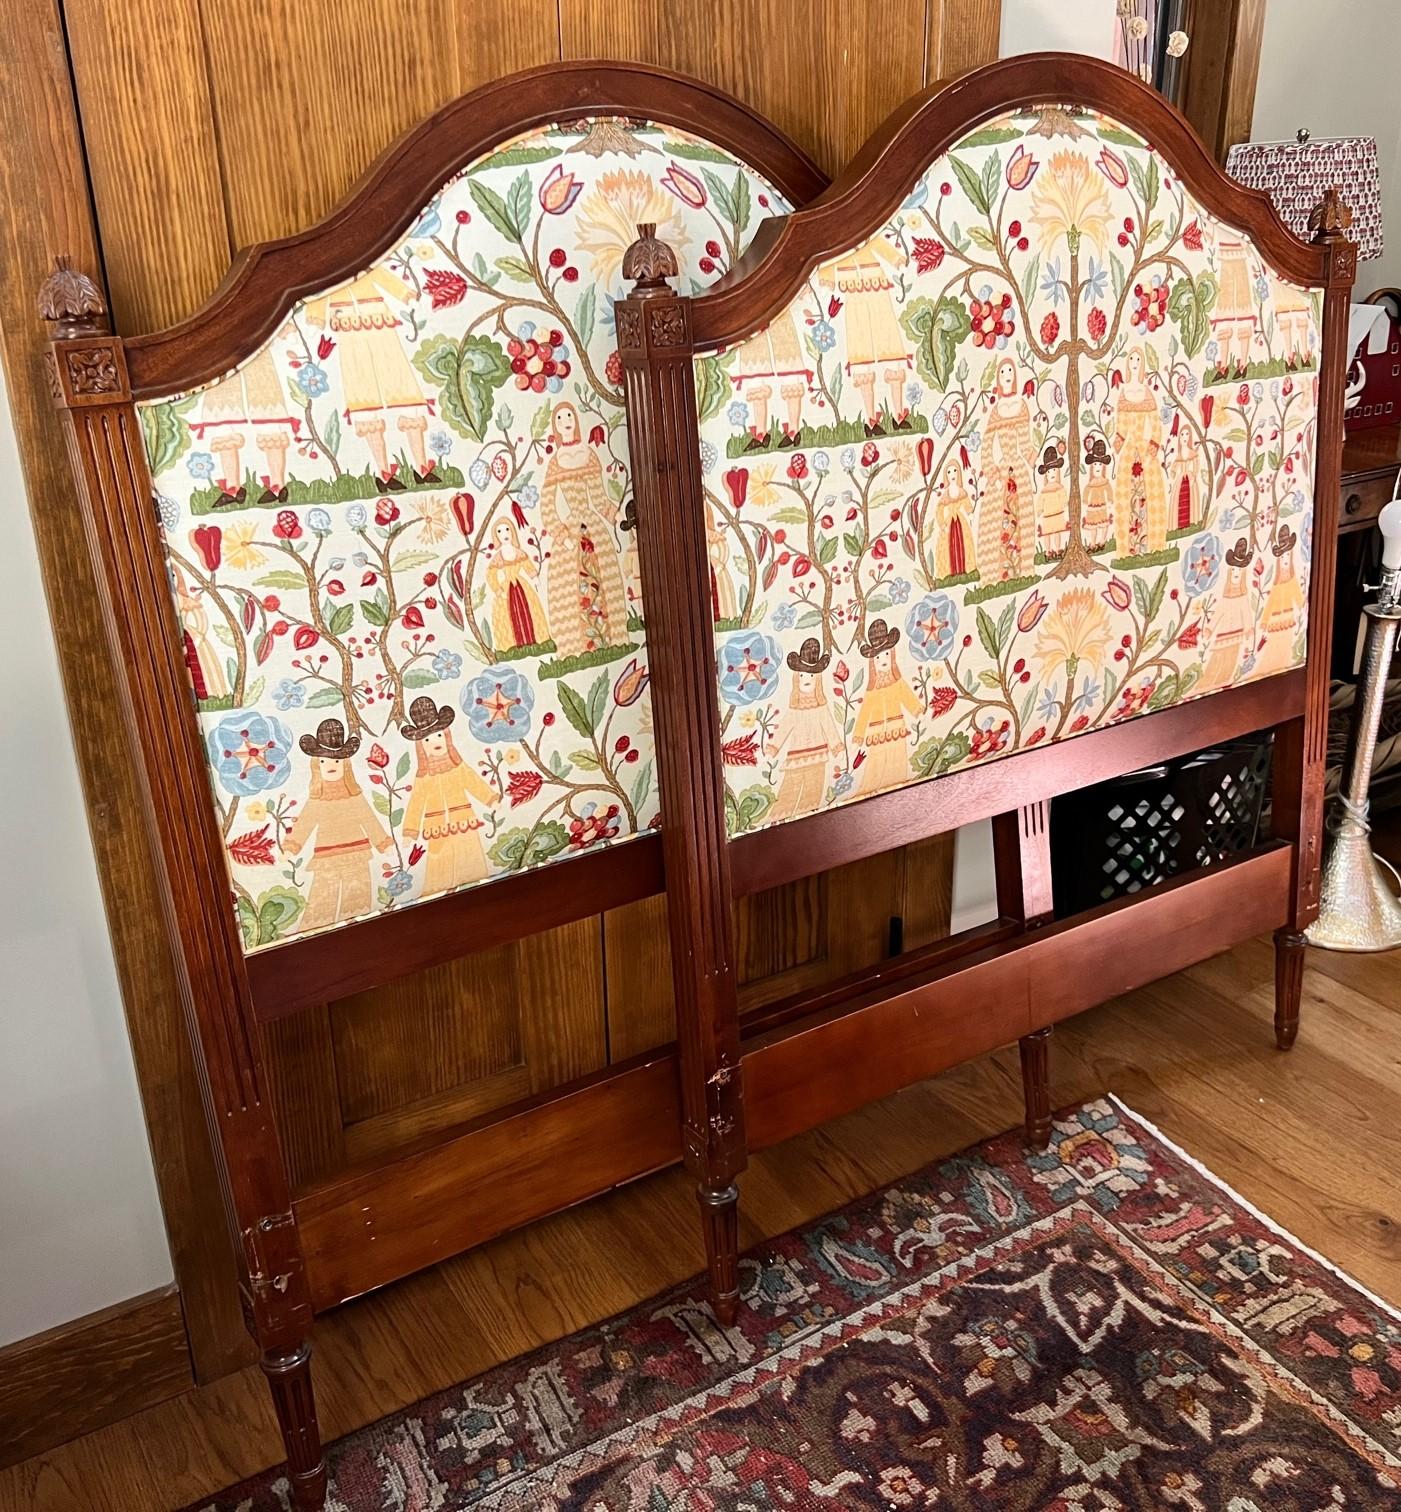 21st C. American made custom upholstered Hickory Chair Simone Twin headboards. The graceful form of the headboard’s top rail was inspired by the bonnet of an antique French secretary’s deck. Simone is finely hand-carved from solid mahogany and